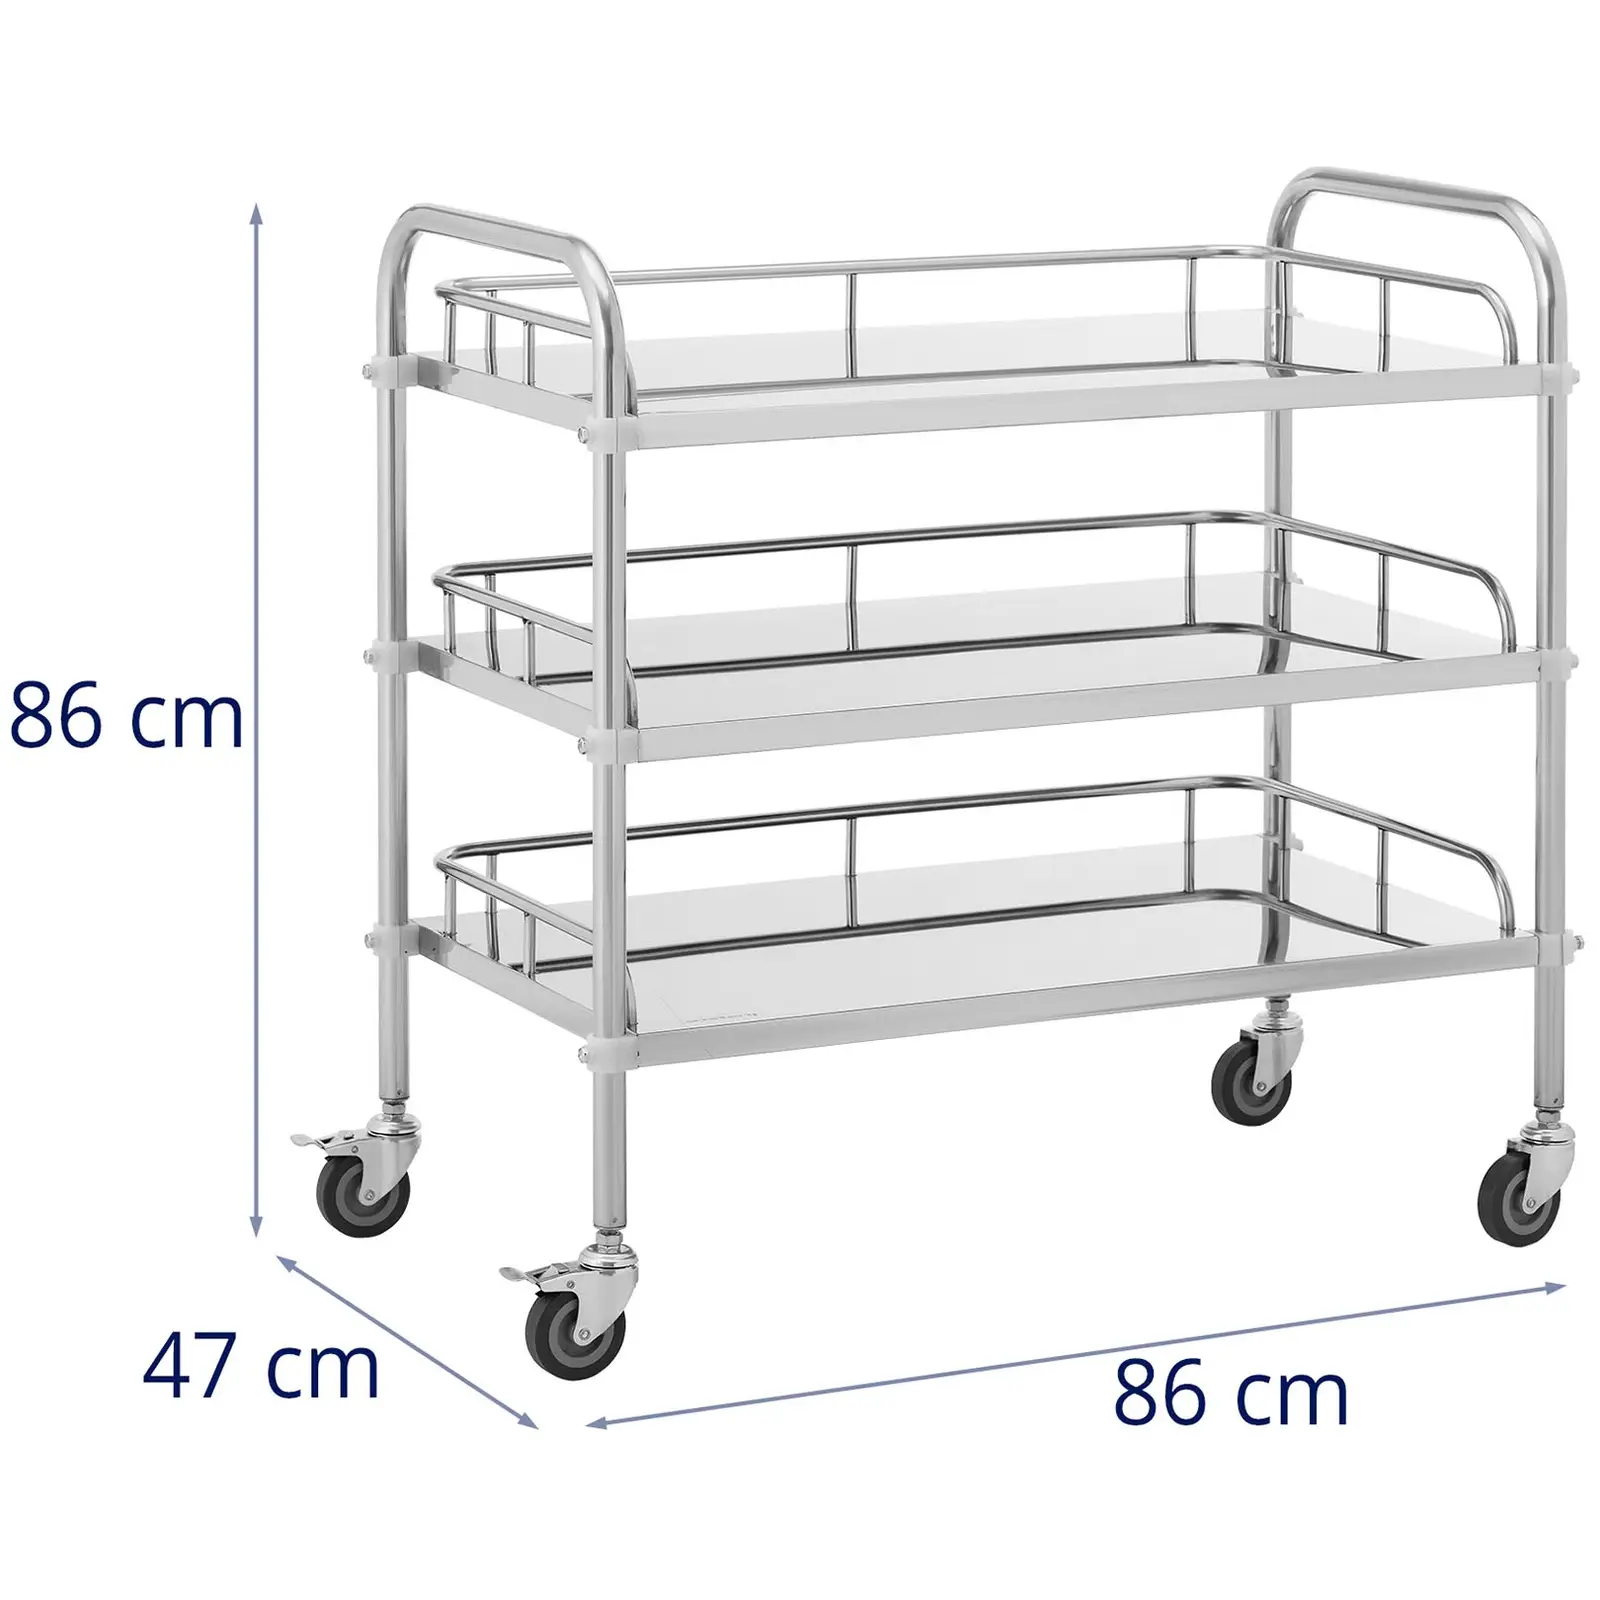 Laboratory Trolley - stainless steel - 3 shelves each 75 x 44 x 2.5 cm - 45 kg